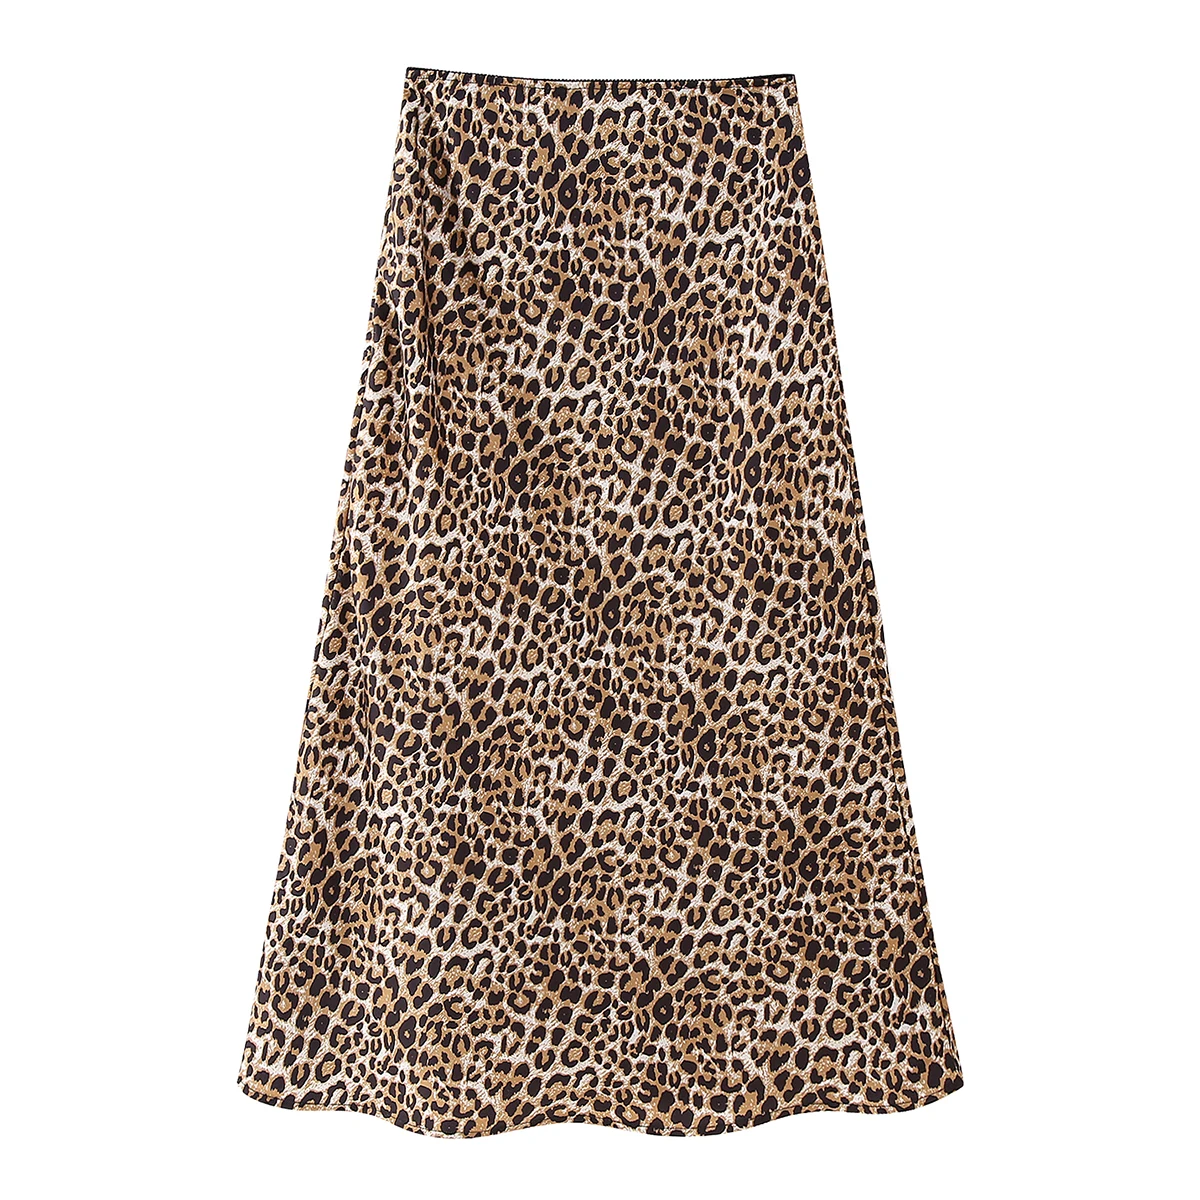 Animal print multi color zipper fly casual fashion hot sale long skirts ...